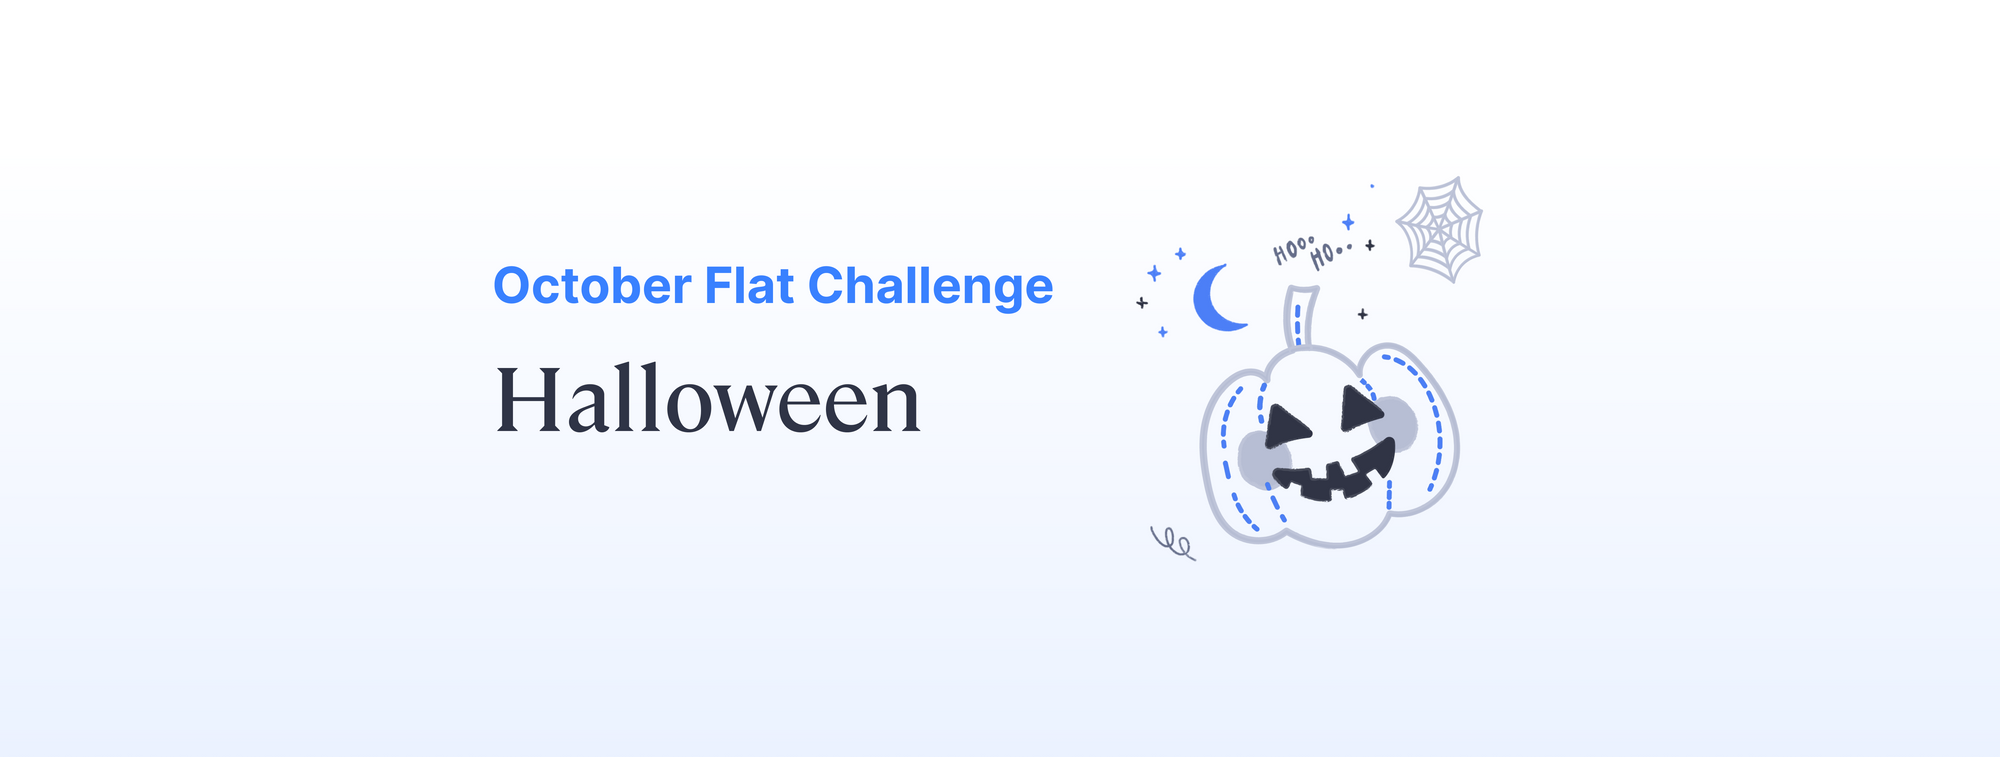 Google Has a Special Doodle Game You Can Play for Halloween Today - GameSpot